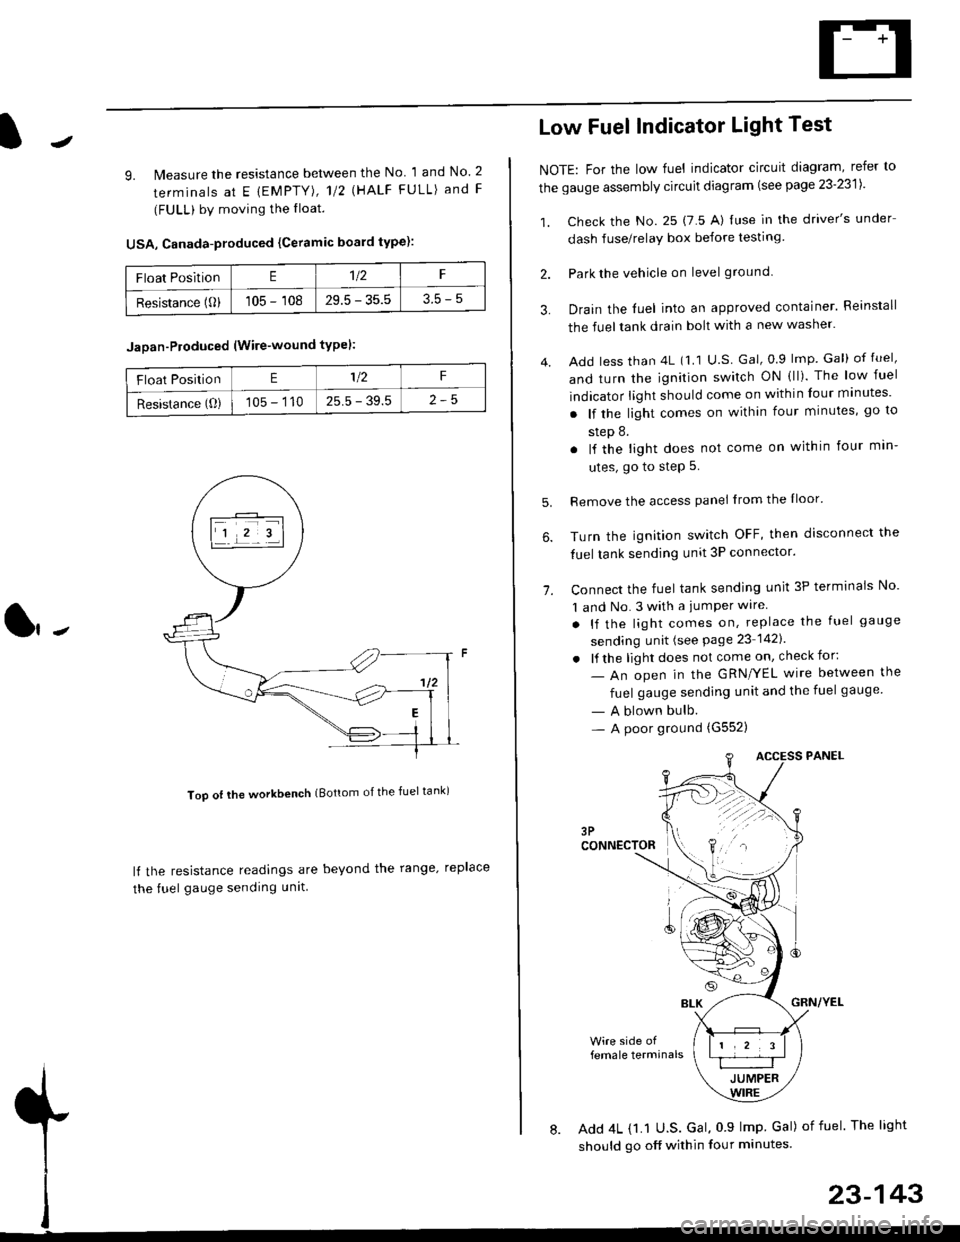 HONDA CIVIC 1996 6.G User Guide J
9. lMeasure the resistance between the No 1 and No. 2
terminals at E {EMPTY), 112 \HALF FULL) and F
(FULL) by moving the lloat.
USA, Canada-produced {Ceramic board type):
Too ot lhe workbench (Botto